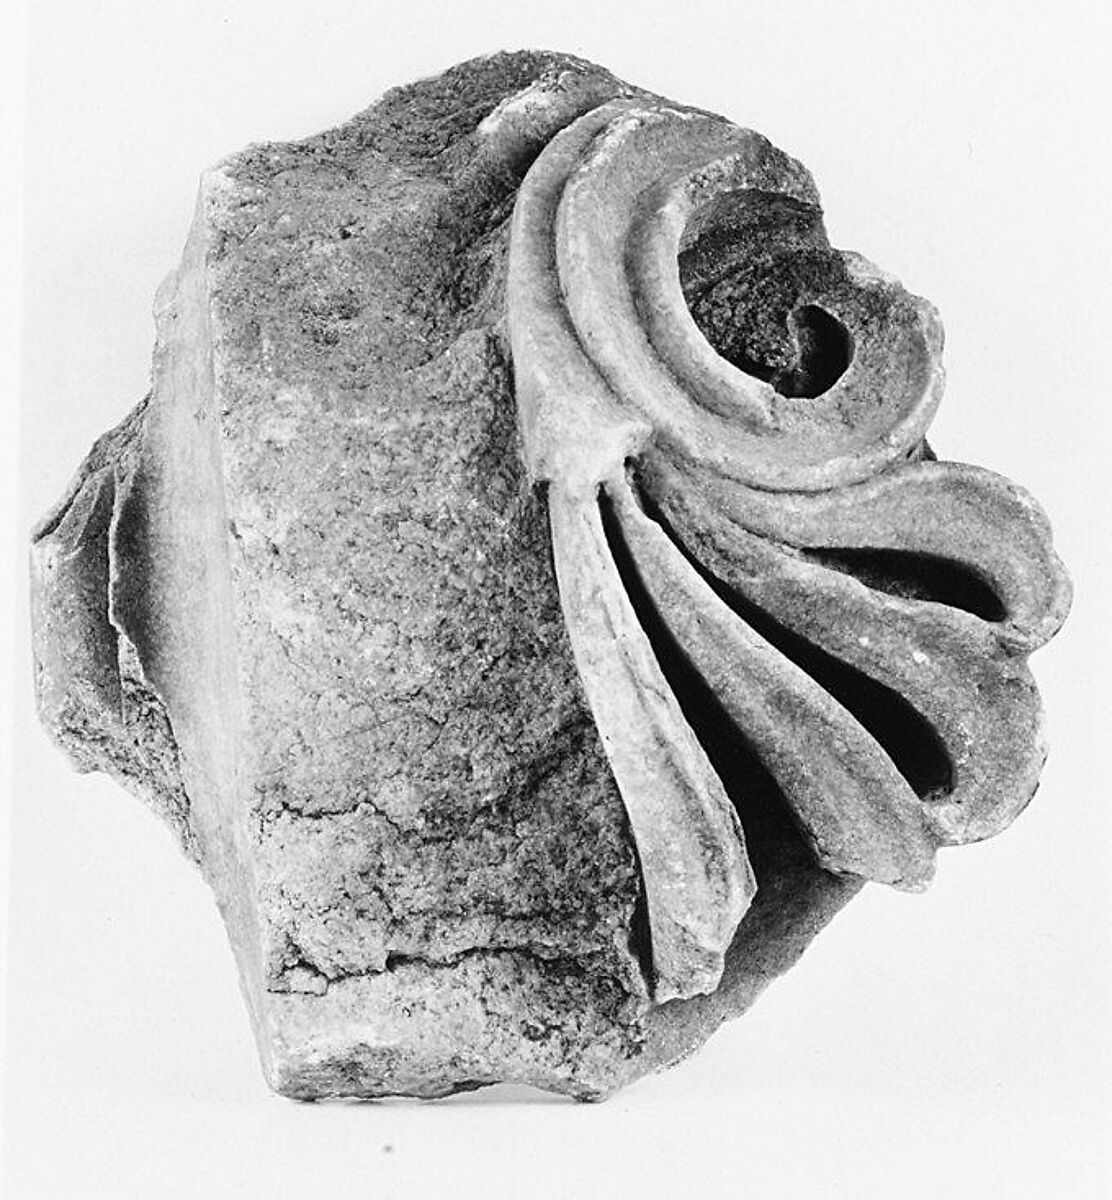 Marble fragment of an Ionic column capital from the Temple of Artemis at Sardis, Marble, Greek 